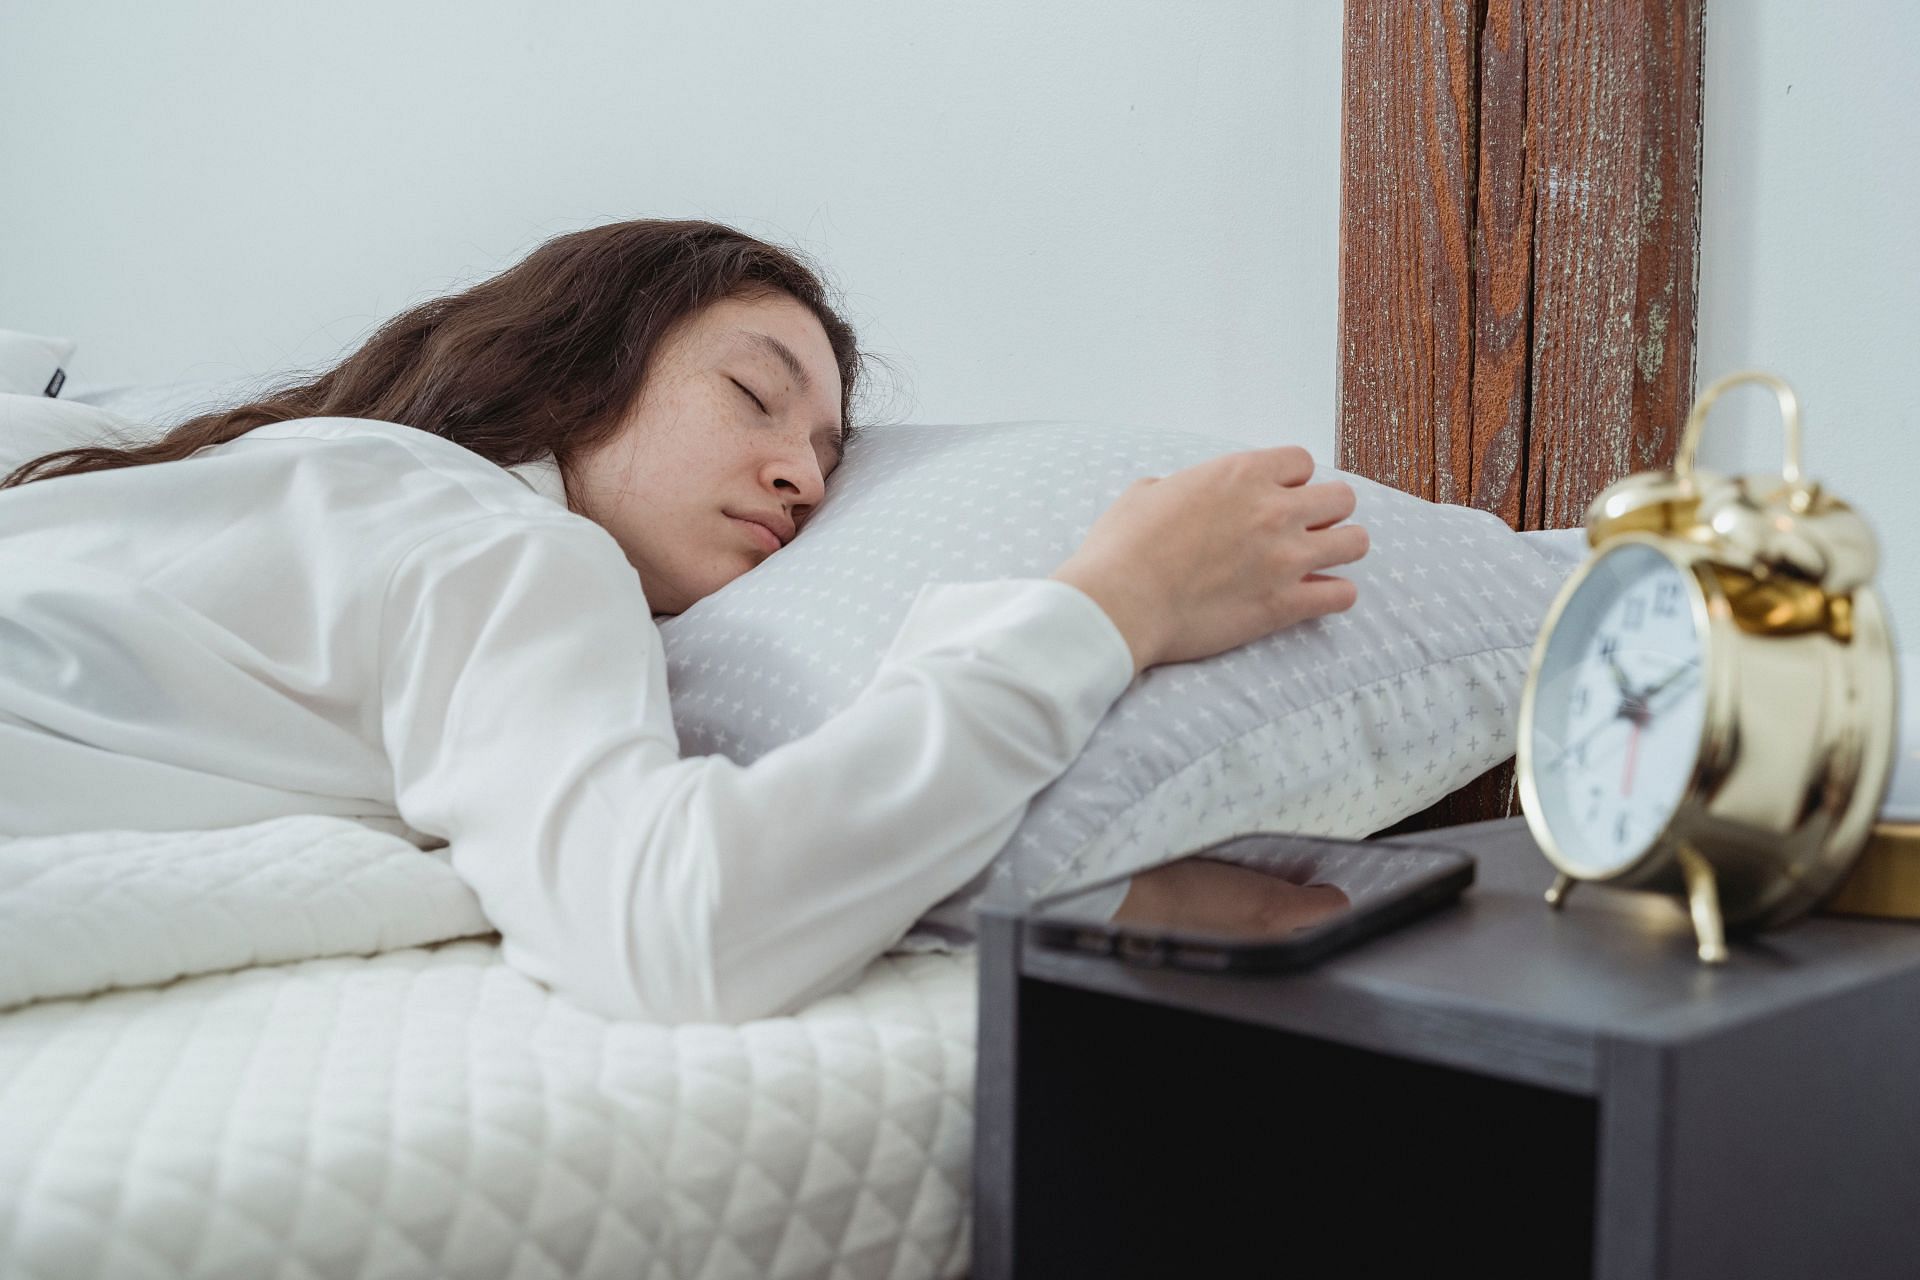 Proper sleep is important for weight management. (Image via Pexels/Miriam Alonso)